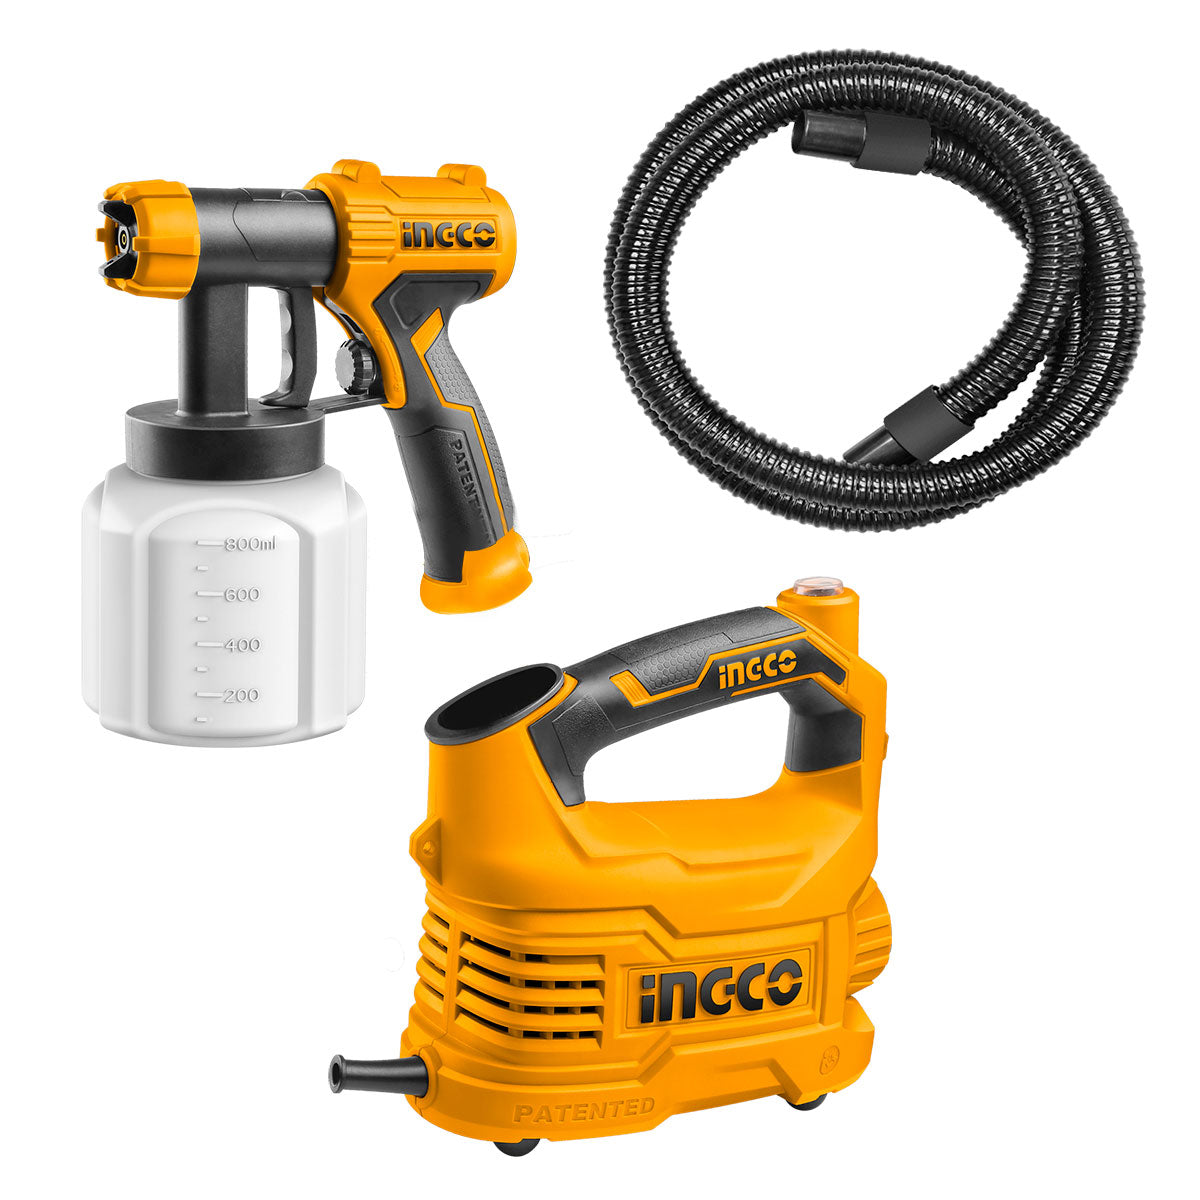 INGCO 550W 800ml HVLP Electric Spray Paint Gun with Viscosity Measuring Cup, Nozzle Cleaning Needle, and Shoulder Strap | SPG5008